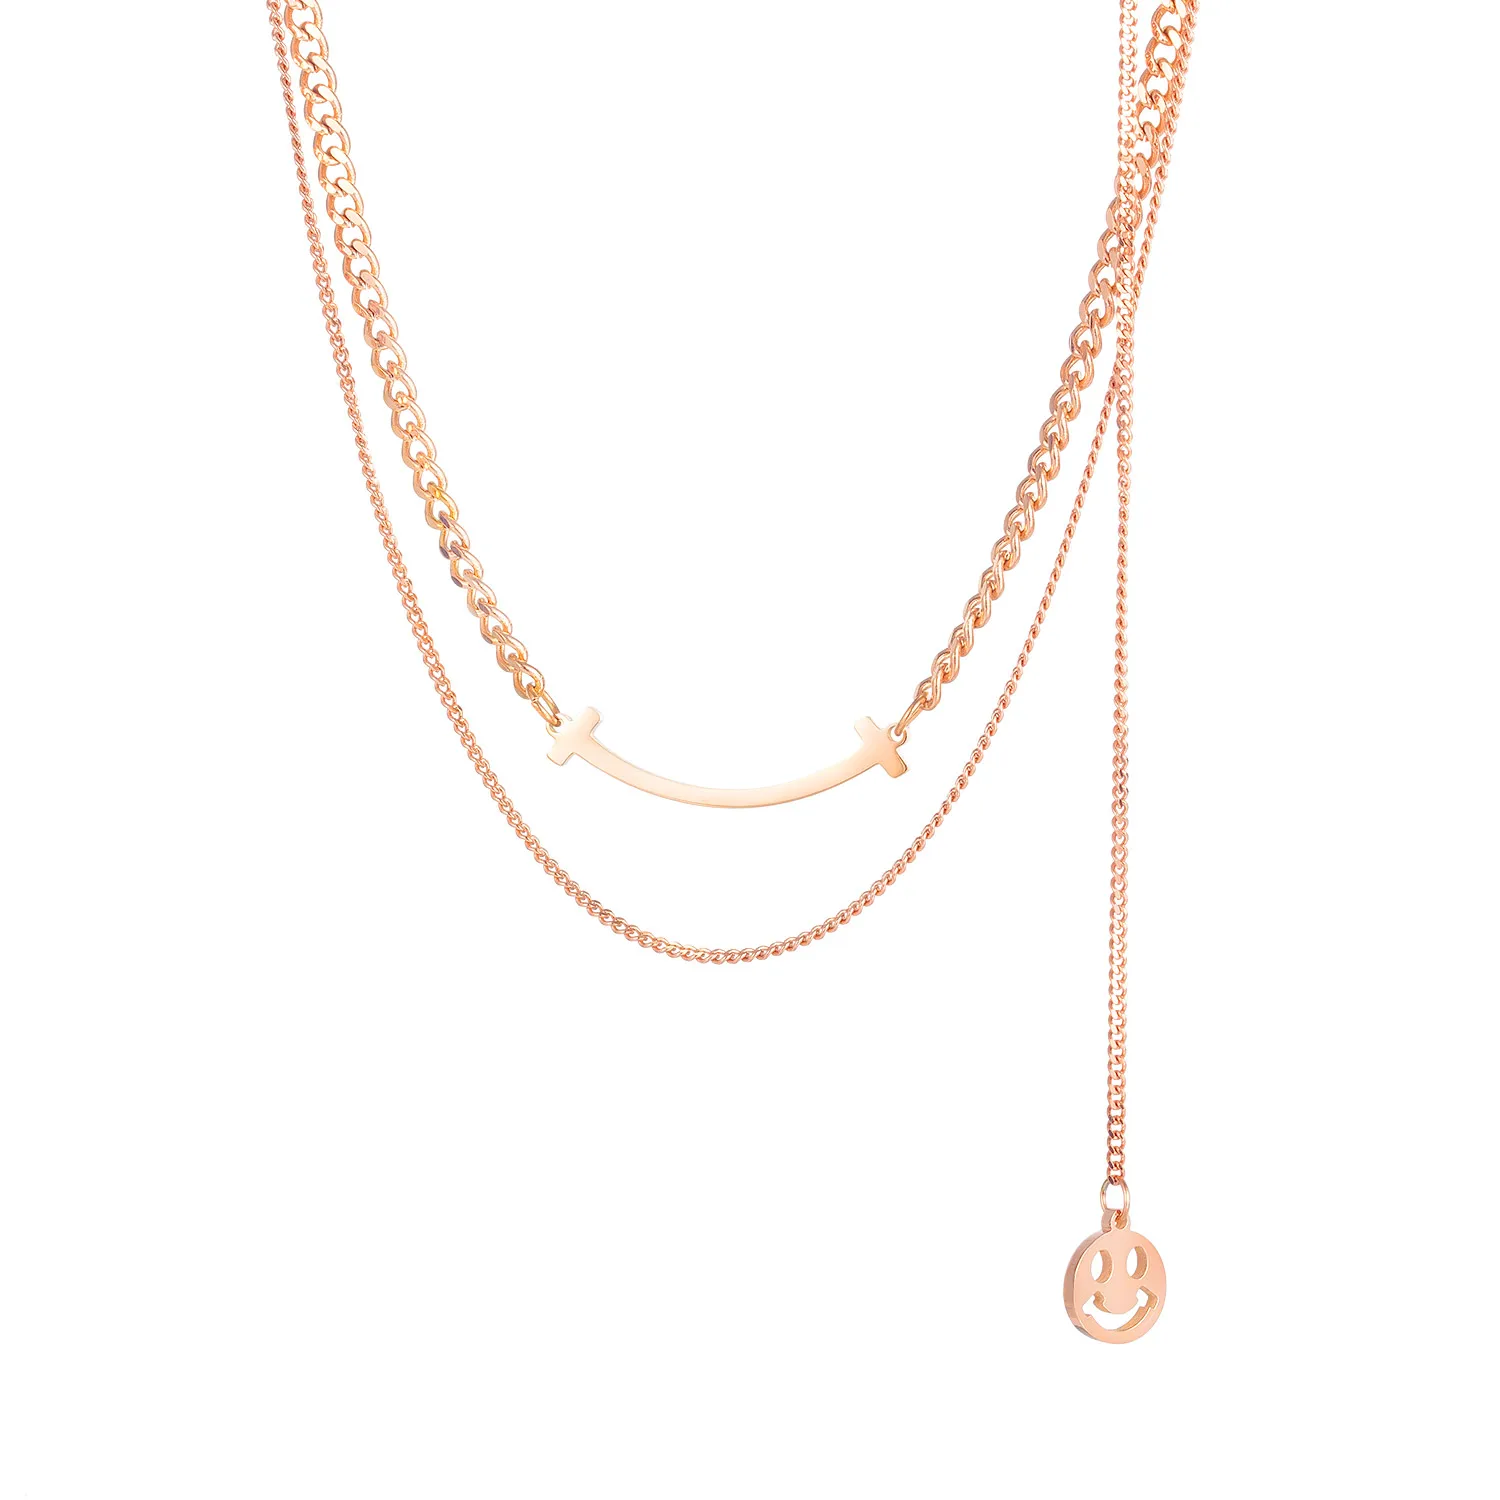 

Fashion Smiley Pendant Layered Chain Necklaces For Women Kpop Stainless Steel Rose Gold Choker Neck Jewelry Accessories Necklace